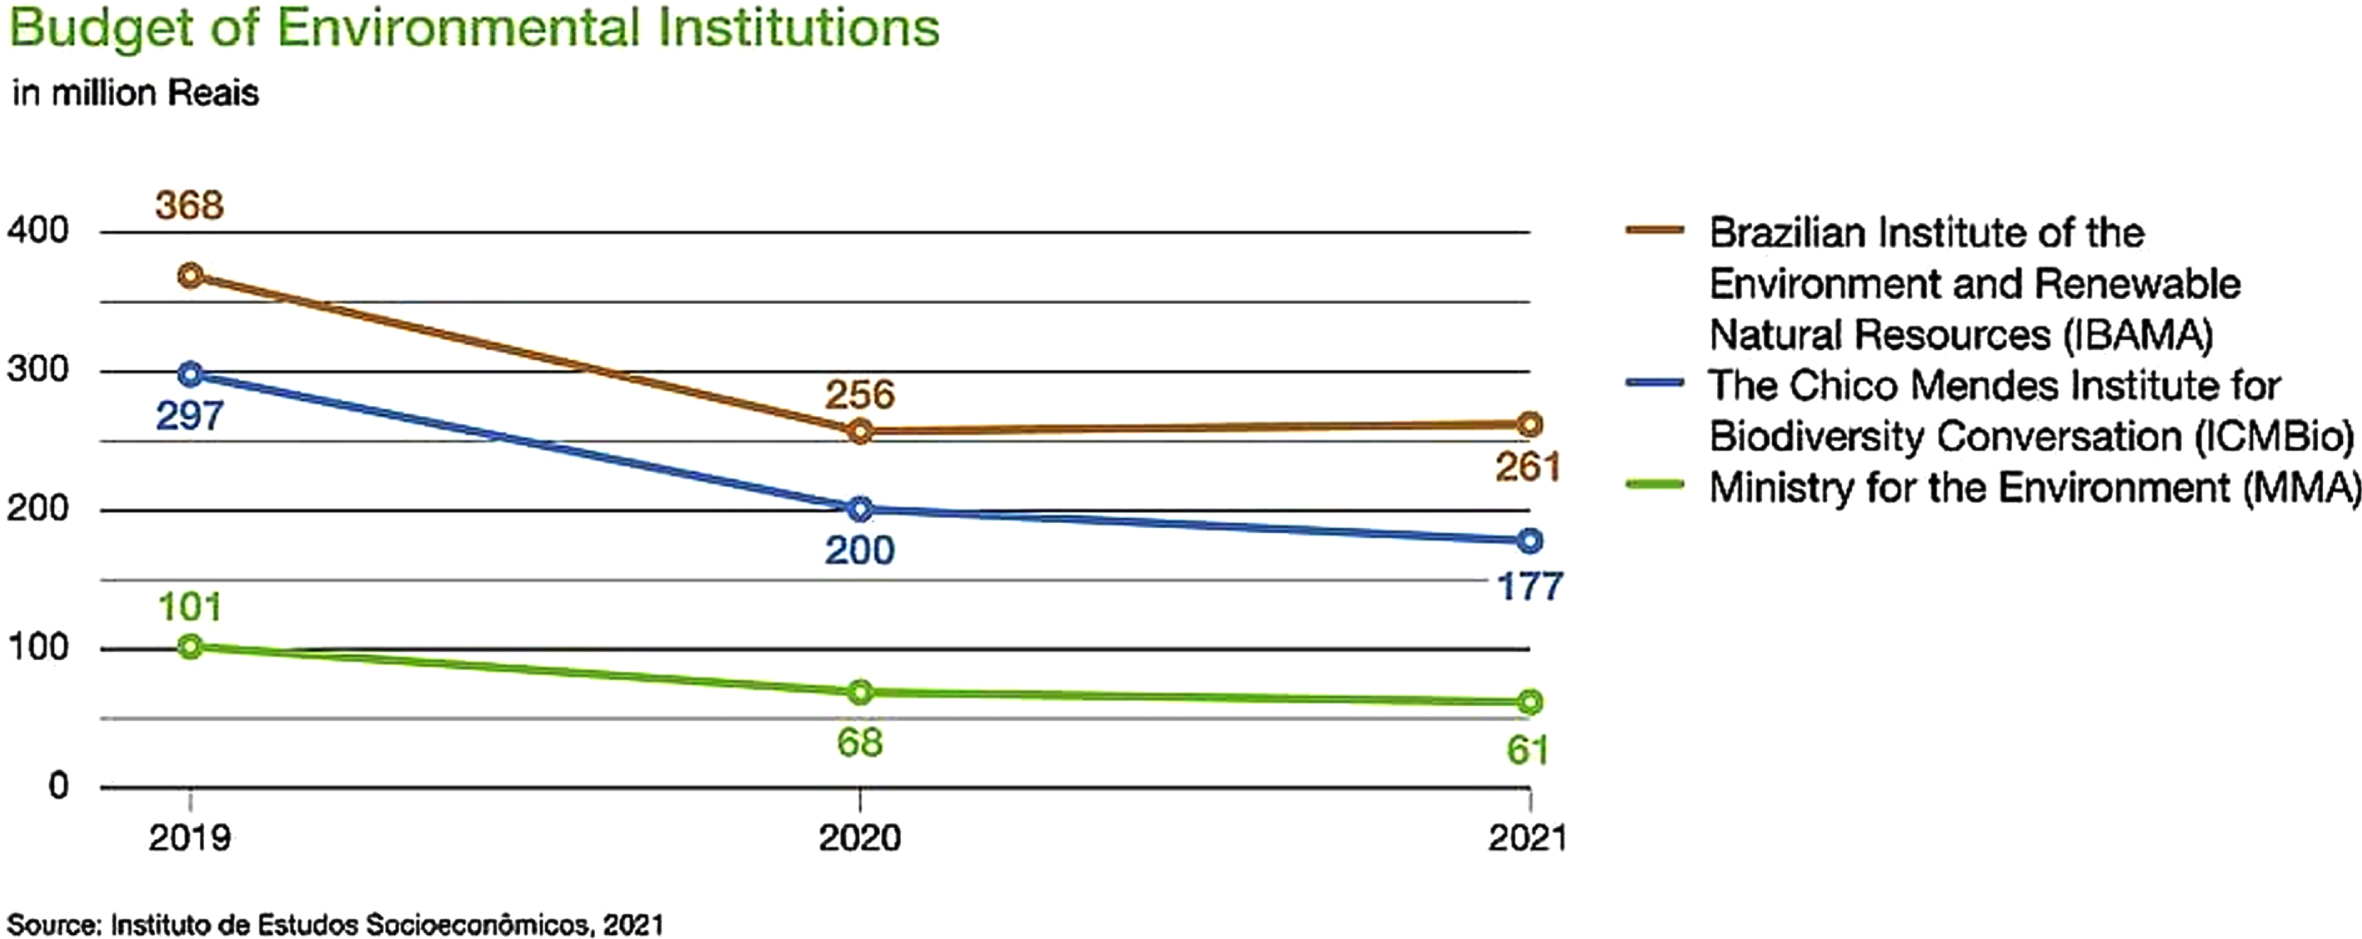 Budget of Environmental Institutions.